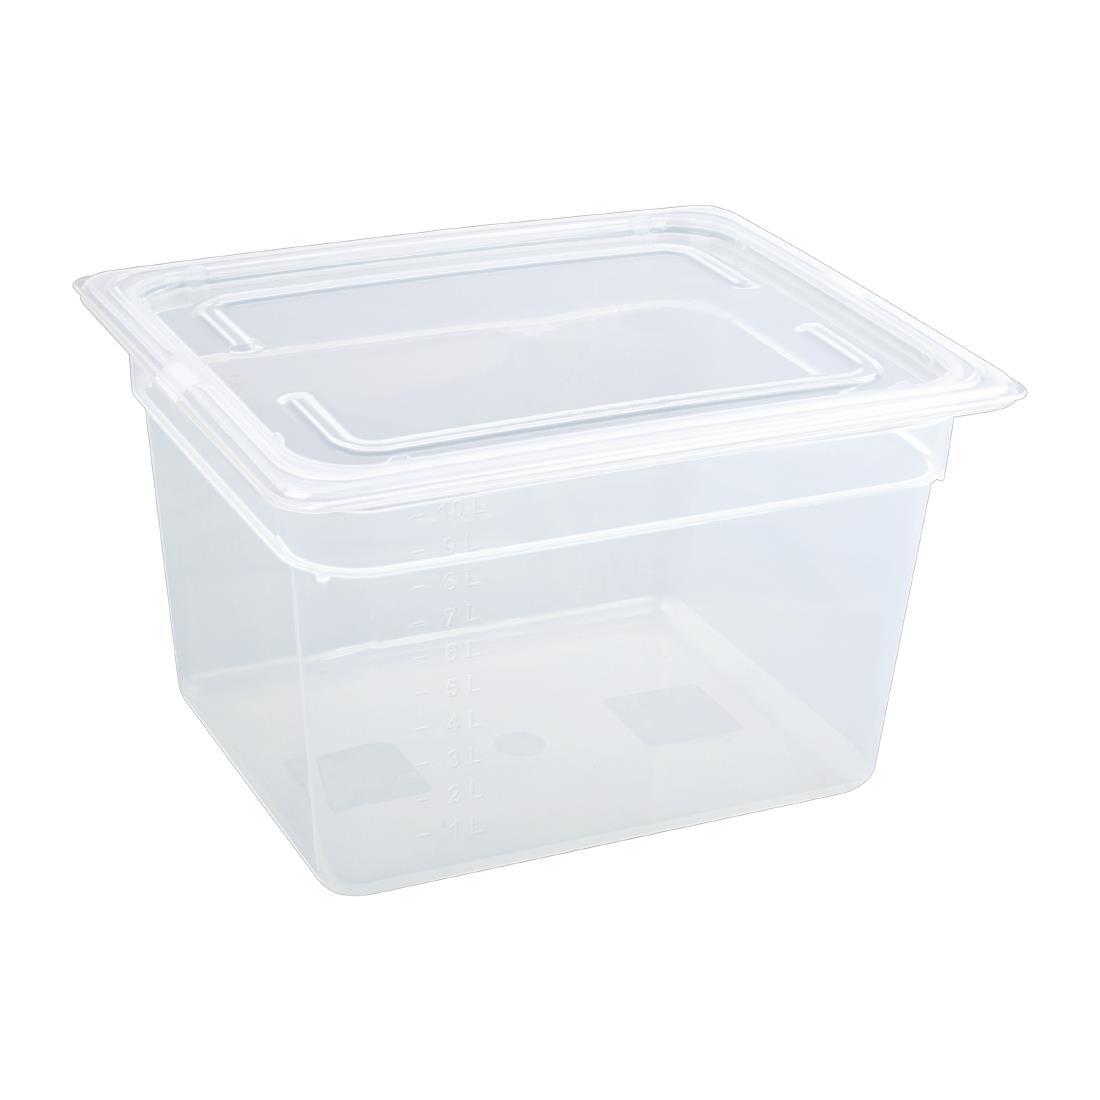 Vogue Polypropylene 1/2 Gastronorm Container with Lid 200mm (Pack of 4) - GJ517  - 2